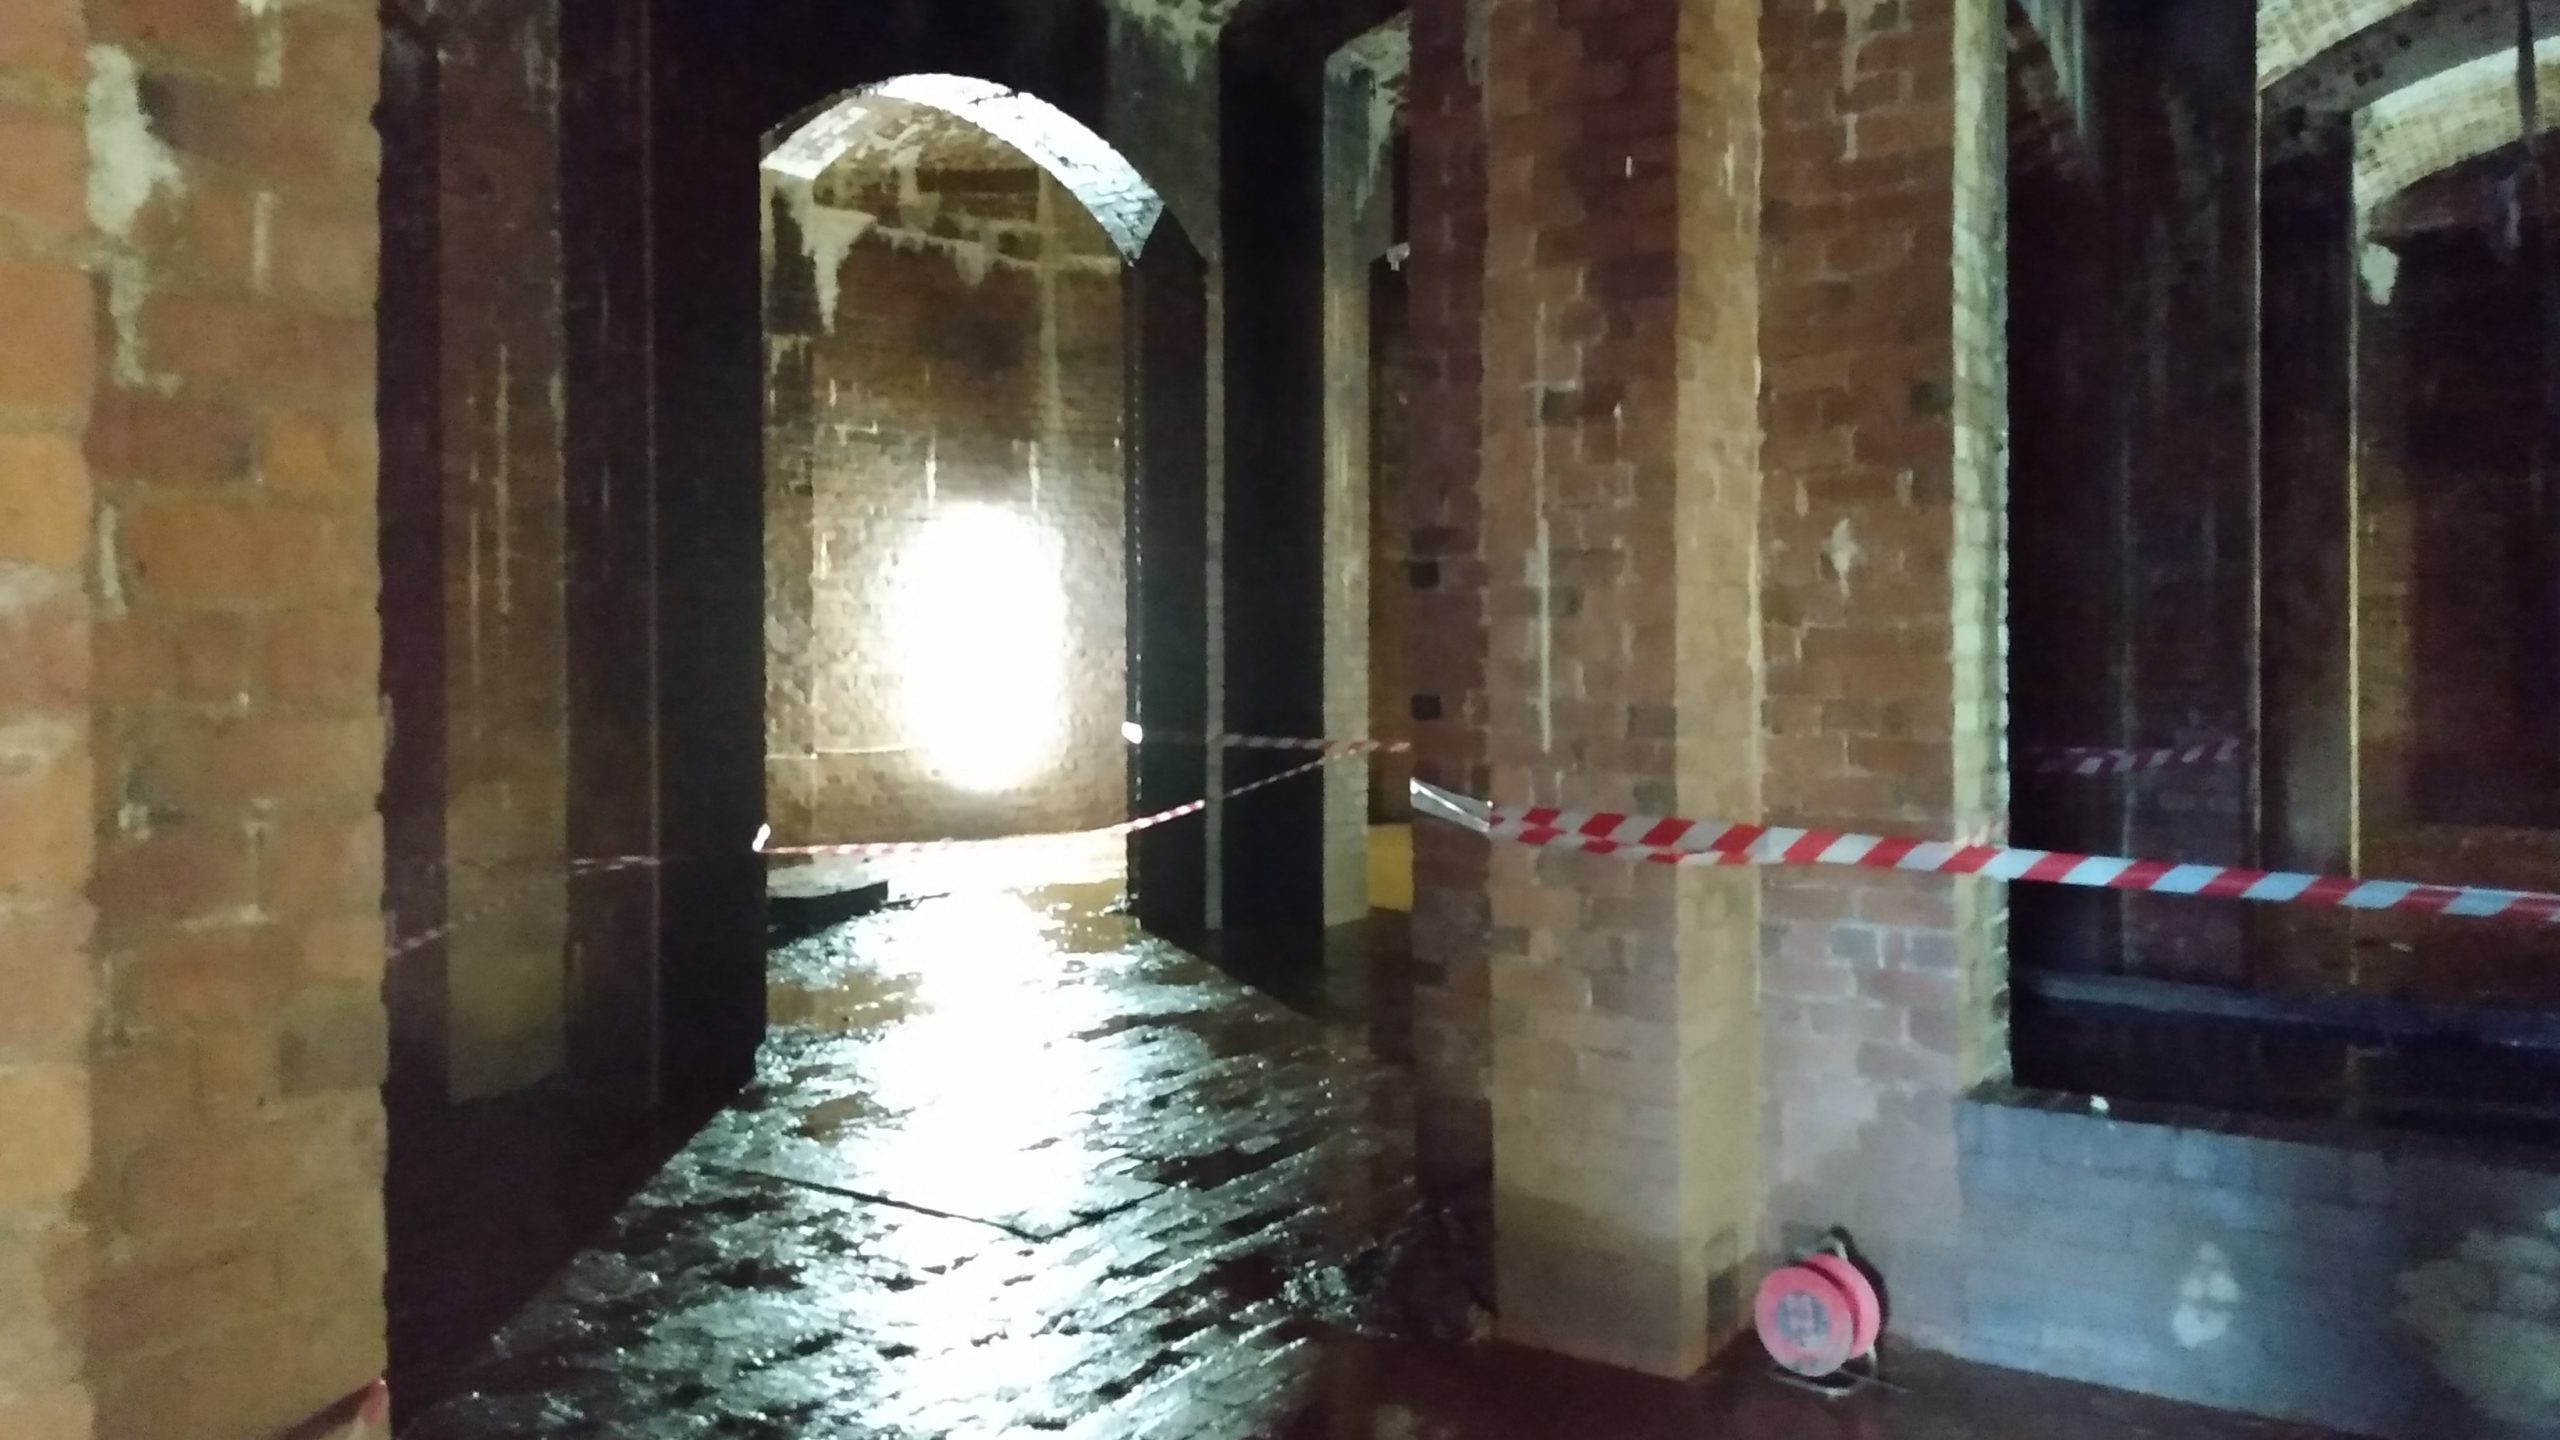 The Victorian subterranean reservoir underneath Sherwood Observatory in Ashfield. Image credit ADC scaled